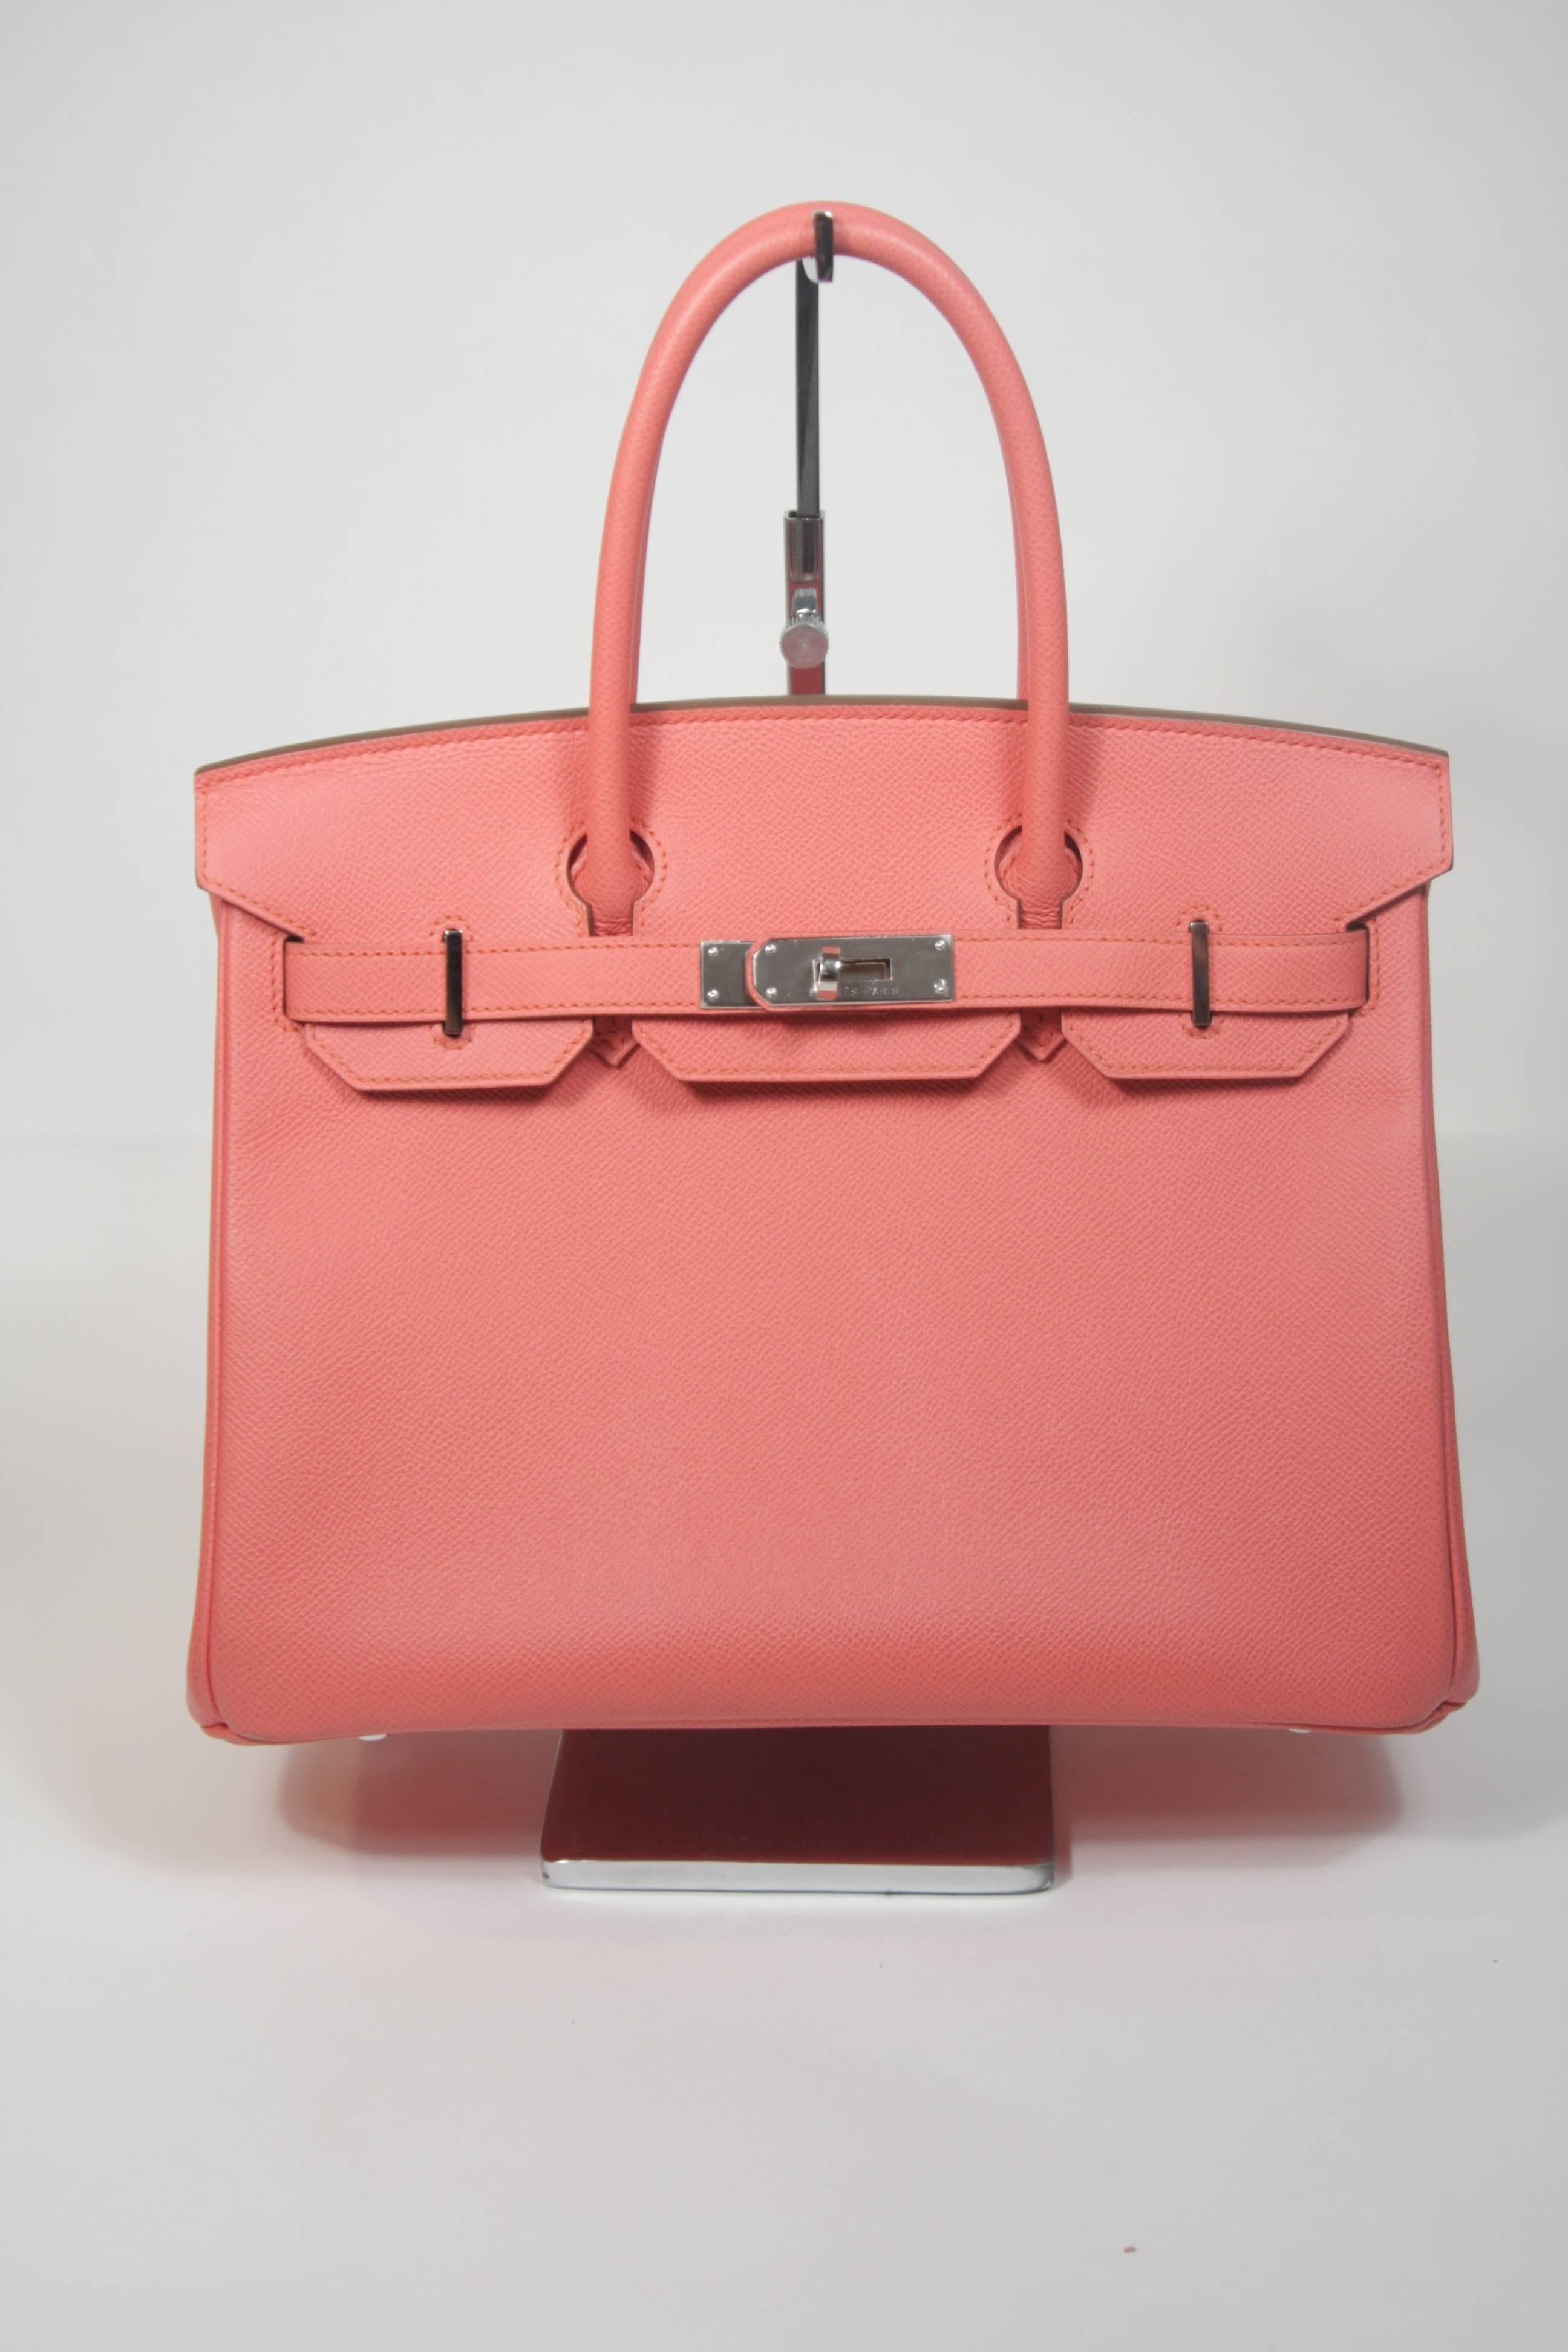 This Hermes  handbag is composed of a Clemence Torion leather which stays true to its shape in all instances and is completely resilient to scratches. Excellent craftsmanship from the house of Hermès. It's not only the most sought after bag in the